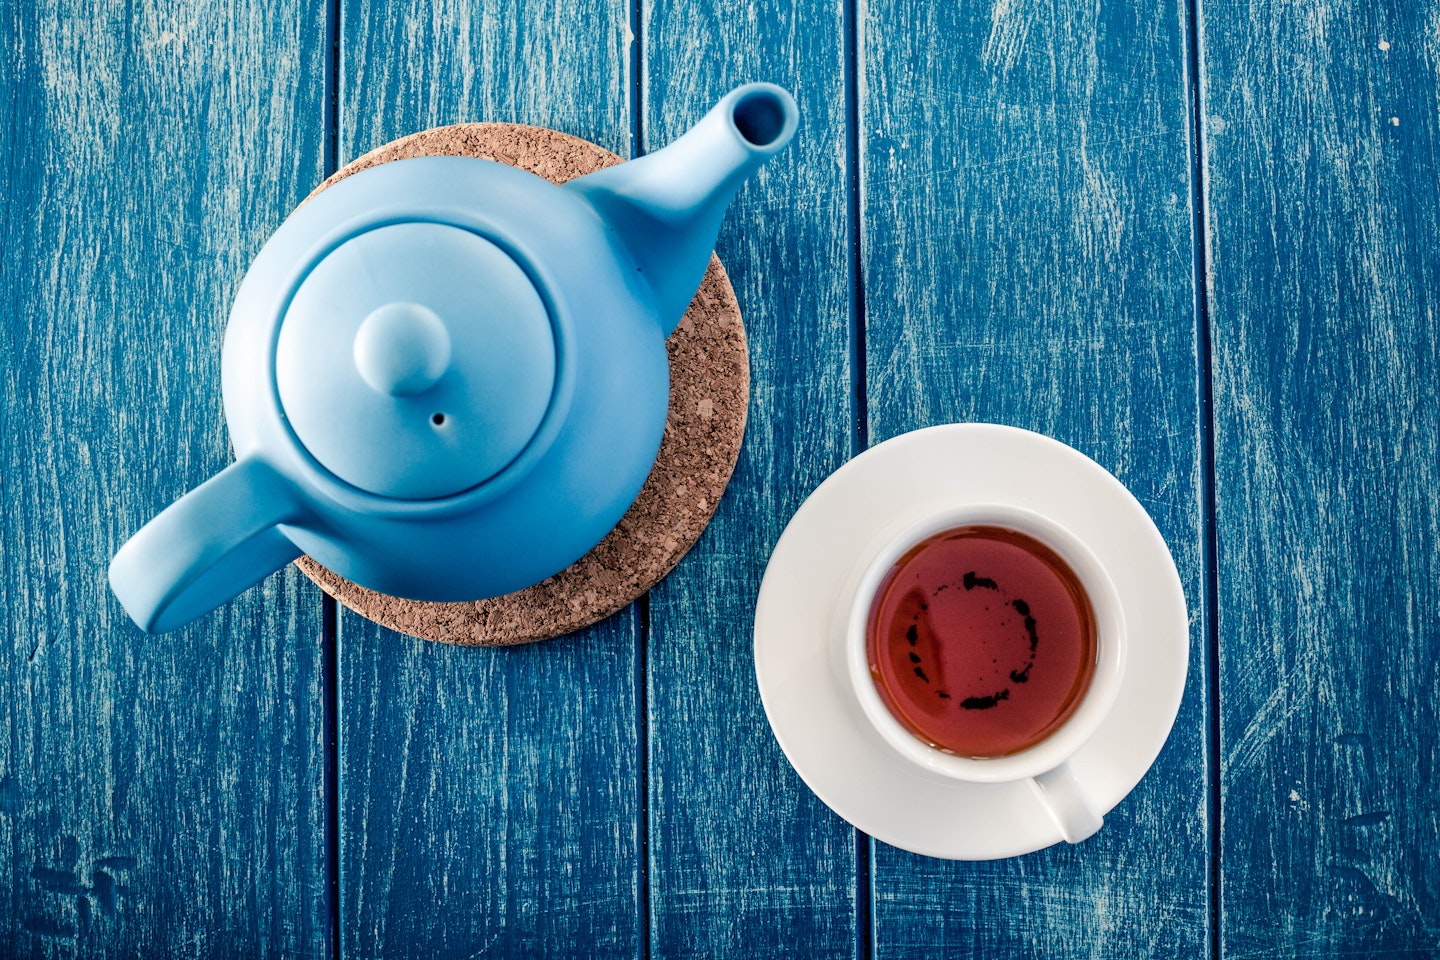 5 Insulated Teapot Options To Keep Your Beverage Warm This Winter